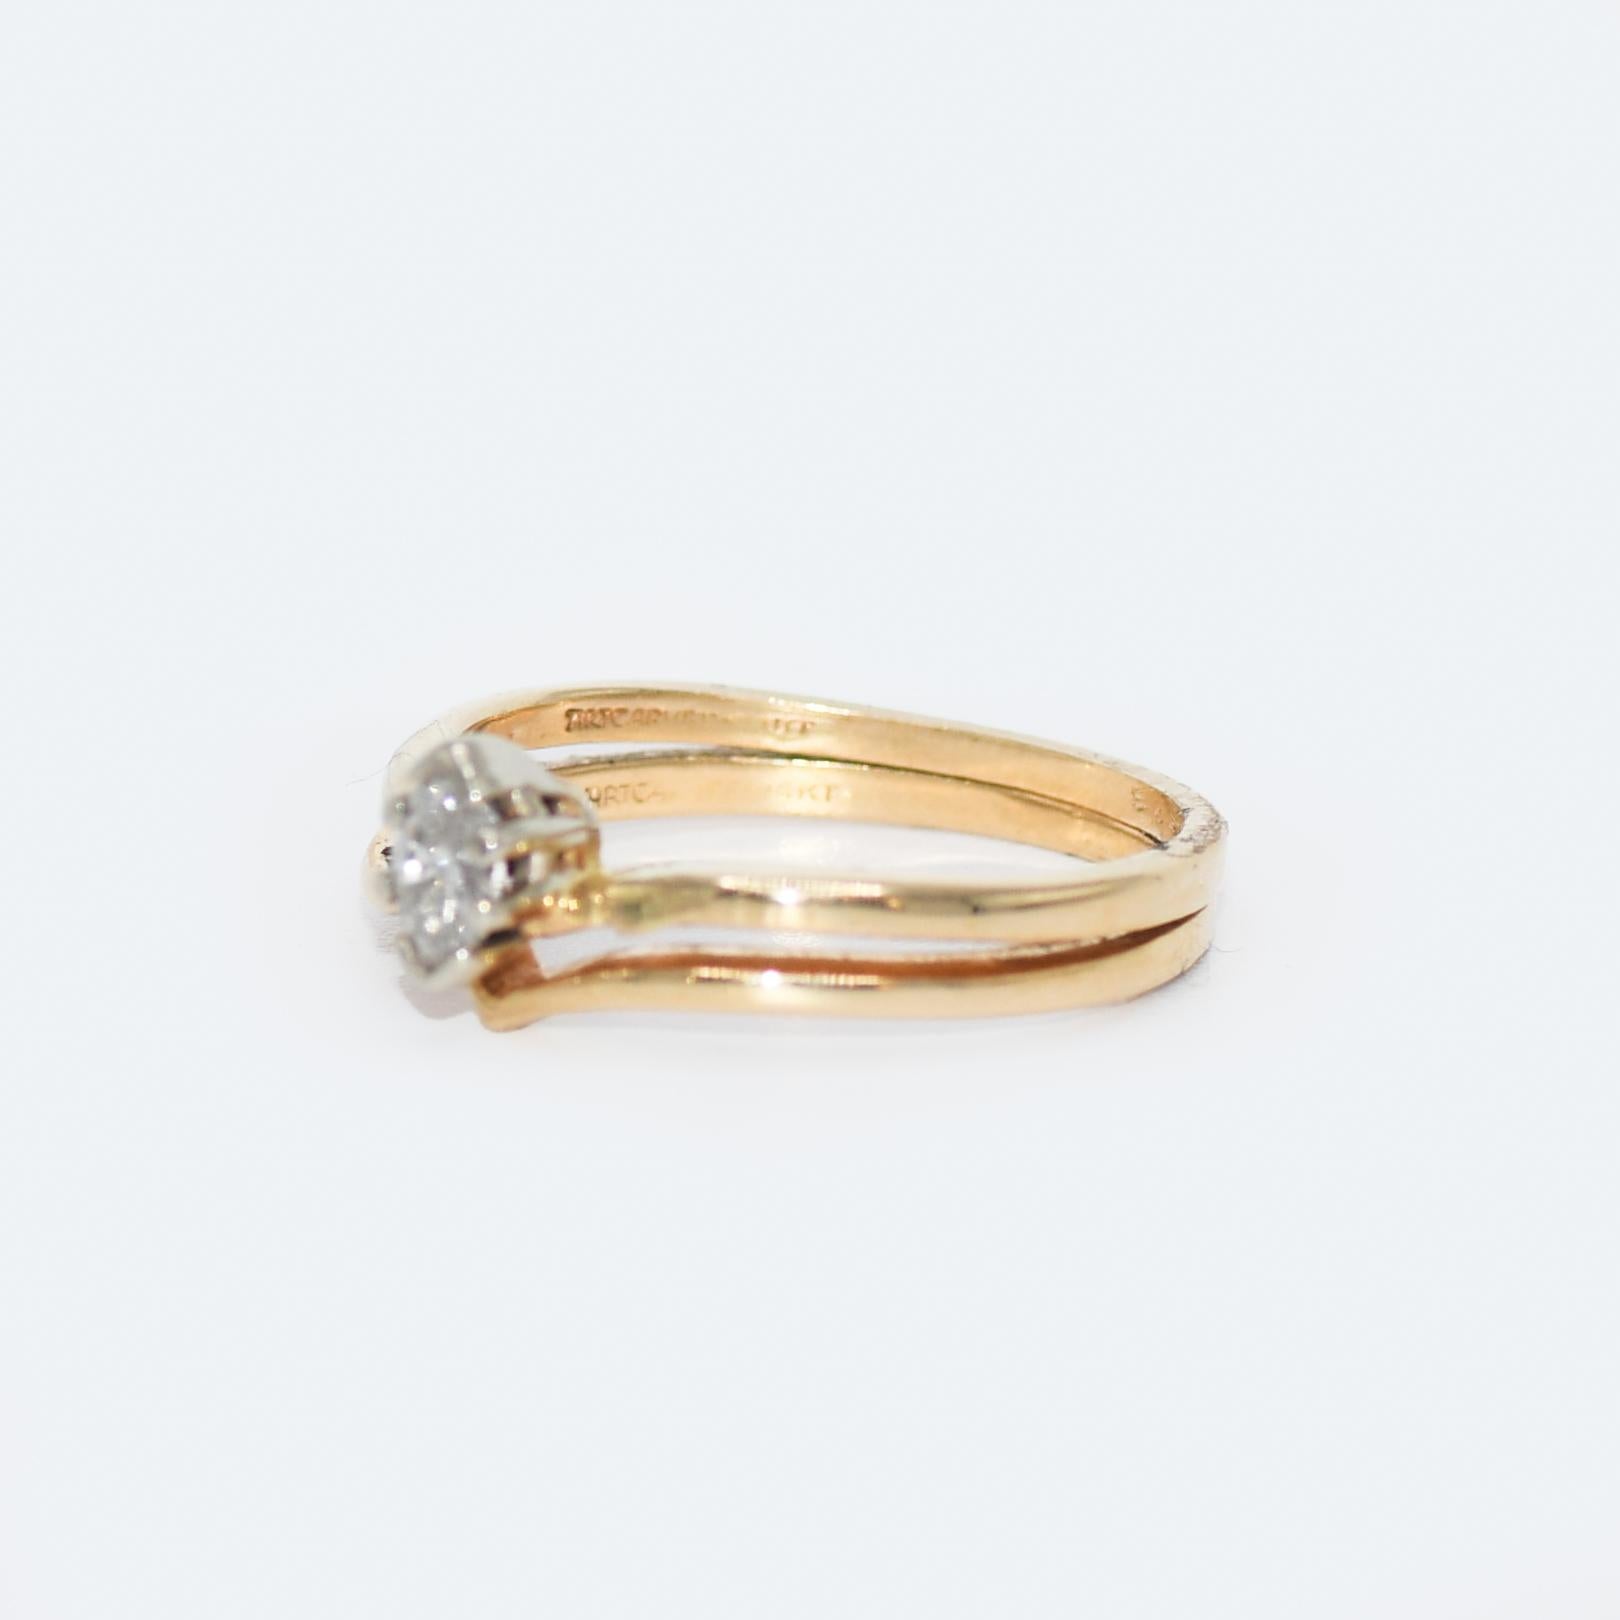 14k Yellow Gold Marquise Shaped Diamond Ring, H Color SI Clarity, Size 6.75 For Sale 1